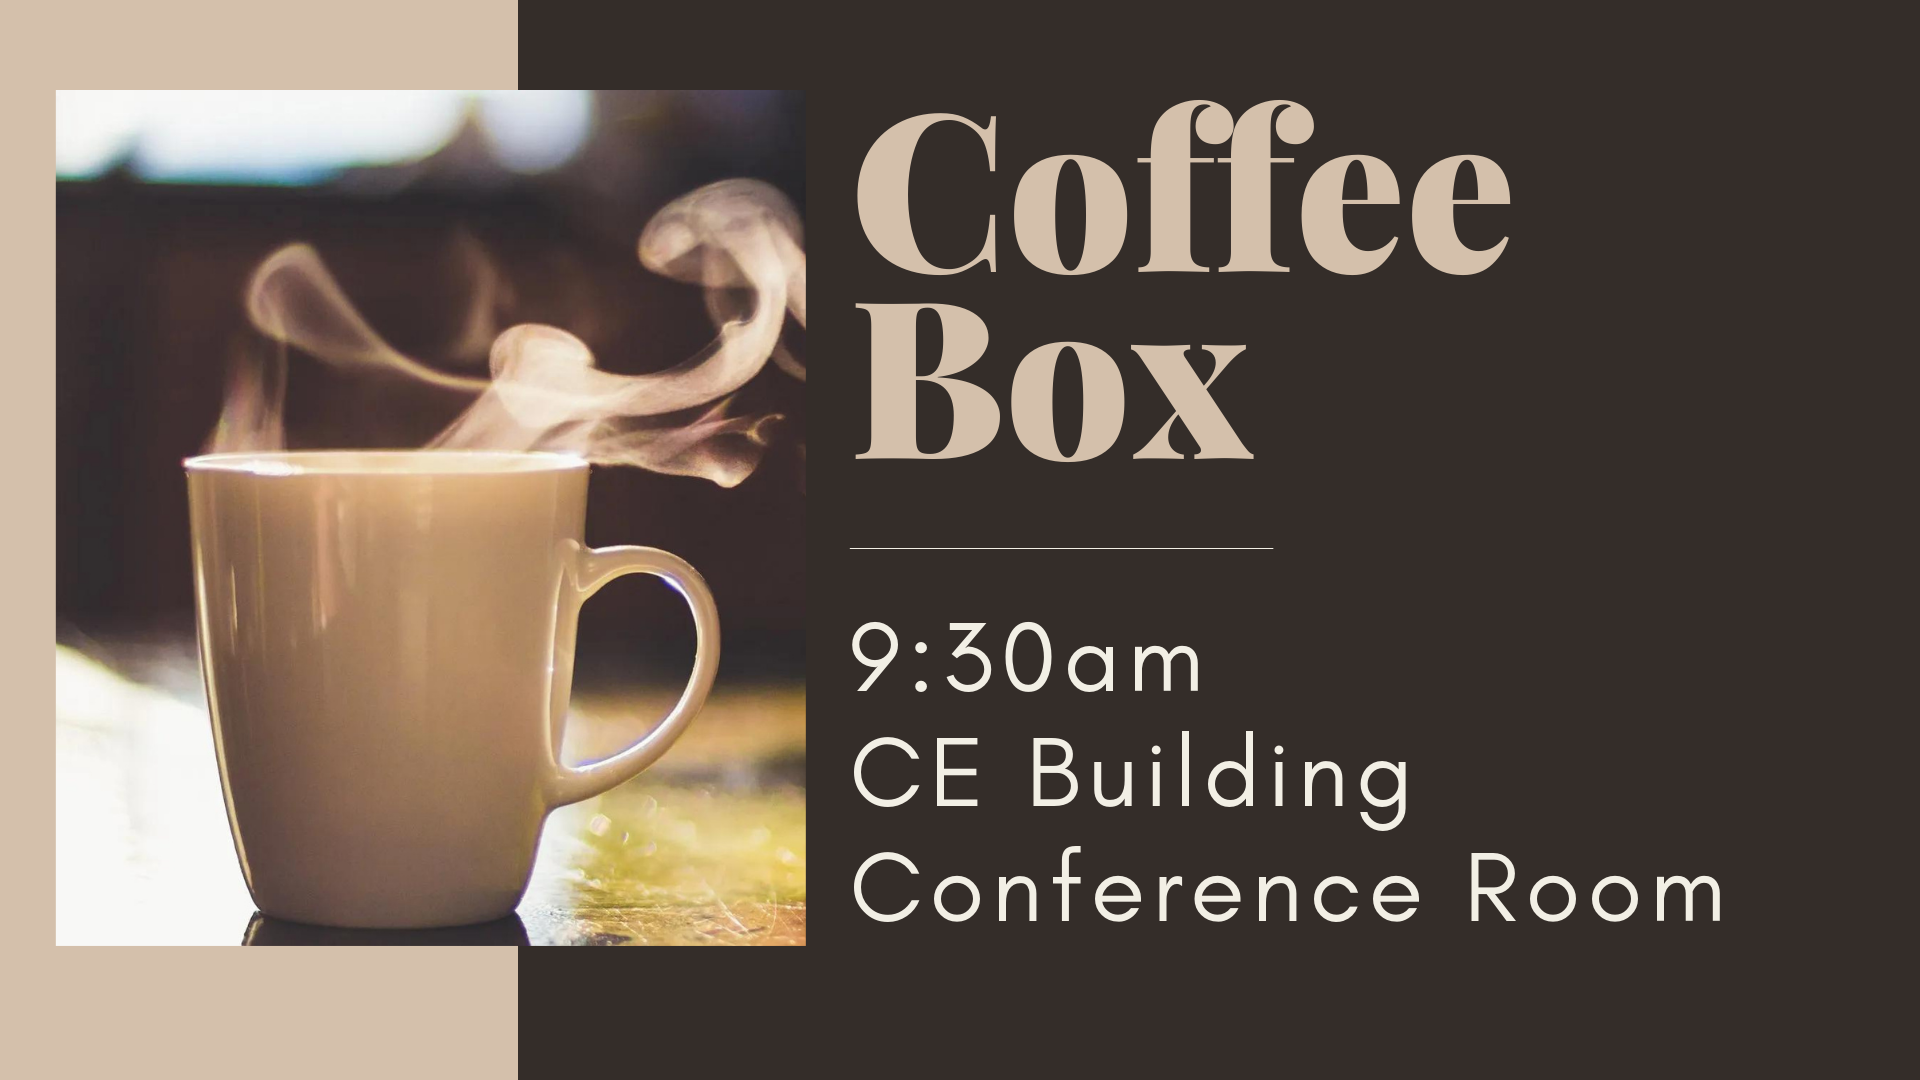 Coffee Box Fellowship @ CE Building Conference Room